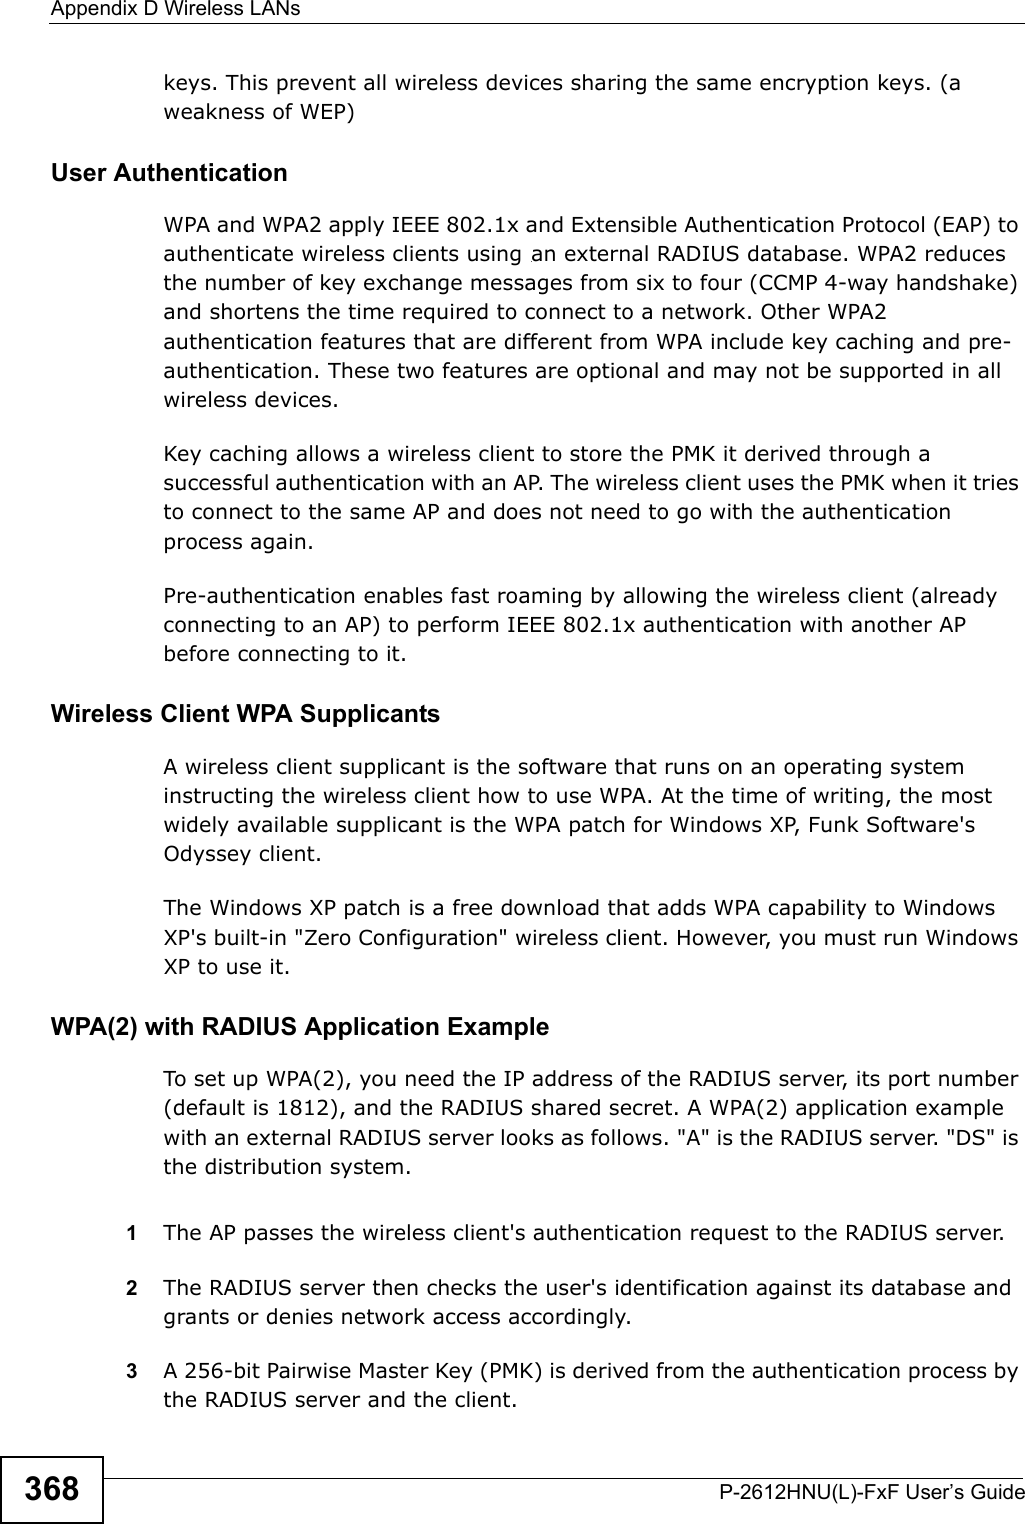 Appendix D Wireless LANsP-2612HNU(L)-FxF User’s Guide368keys. This prevent all wireless devices sharing the same encryption keys. (aweakness of WEP)User Authentication WPA and WPA2 apply IEEE 802.1x and Extensible Authentication Protocol (EAP) to authenticate wireless clients using an external RADIUS database. WPA2 reduces the number of key exchange messages from six to four (CCMP 4-way handshake)and shortens the time required to connect to a network. Other WPA2 authentication features that are different from WPA include key caching and pre-authentication. These two features are optional and may not be supported in all wireless devices.Key caching allows a wireless client to store the PMK it derived through a successful authentication with an AP. The wireless client uses the PMK when it tries to connect to the same AP and does not need to go with the authentication process again.Pre-authentication enables fast roaming by allowing the wireless client (alreadyconnecting to an AP) to perform IEEE 802.1x authentication with another AP before connecting to it.Wireless Client WPA SupplicantsA wireless client supplicant is the software that runs on an operating system instructing the wireless client how to use WPA. At the time of writing, the mostwidely available supplicant is the WPA patch for Windows XP, Funk Software&apos;s Odyssey client. The Windows XP patch is a free download that adds WPA capability to Windows XP&apos;s built-in &quot;Zero Configuration&quot; wireless client. However, you must run WindowsXP to use it. WPA(2) with RADIUS Application ExampleTo set up WPA(2), you need the IP address of the RADIUS server, its port number (default is 1812), and the RADIUS shared secret. A WPA(2) application example with an external RADIUS server looks as follows. &quot;A&quot; is the RADIUS server. &quot;DS&quot; is the distribution system.1The AP passes the wireless client&apos;s authentication request to the RADIUS server.2The RADIUS server then checks the user&apos;s identification against its database andgrants or denies network access accordingly.3A 256-bit Pairwise Master Key (PMK) is derived from the authentication process bythe RADIUS server and the client.